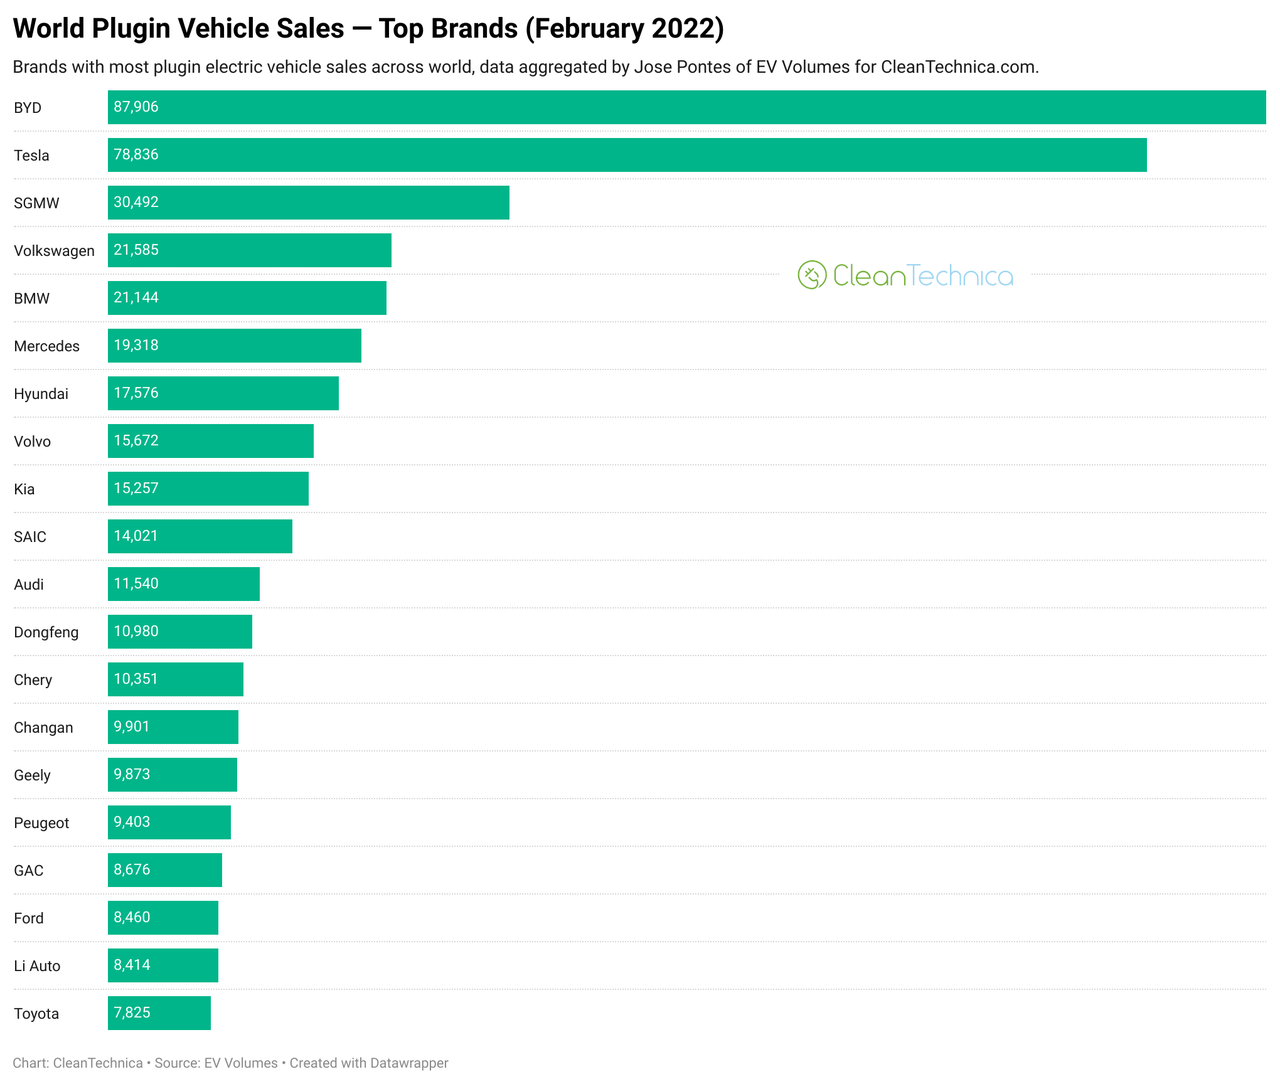 Global plugin electric car sales by brand for February 2022